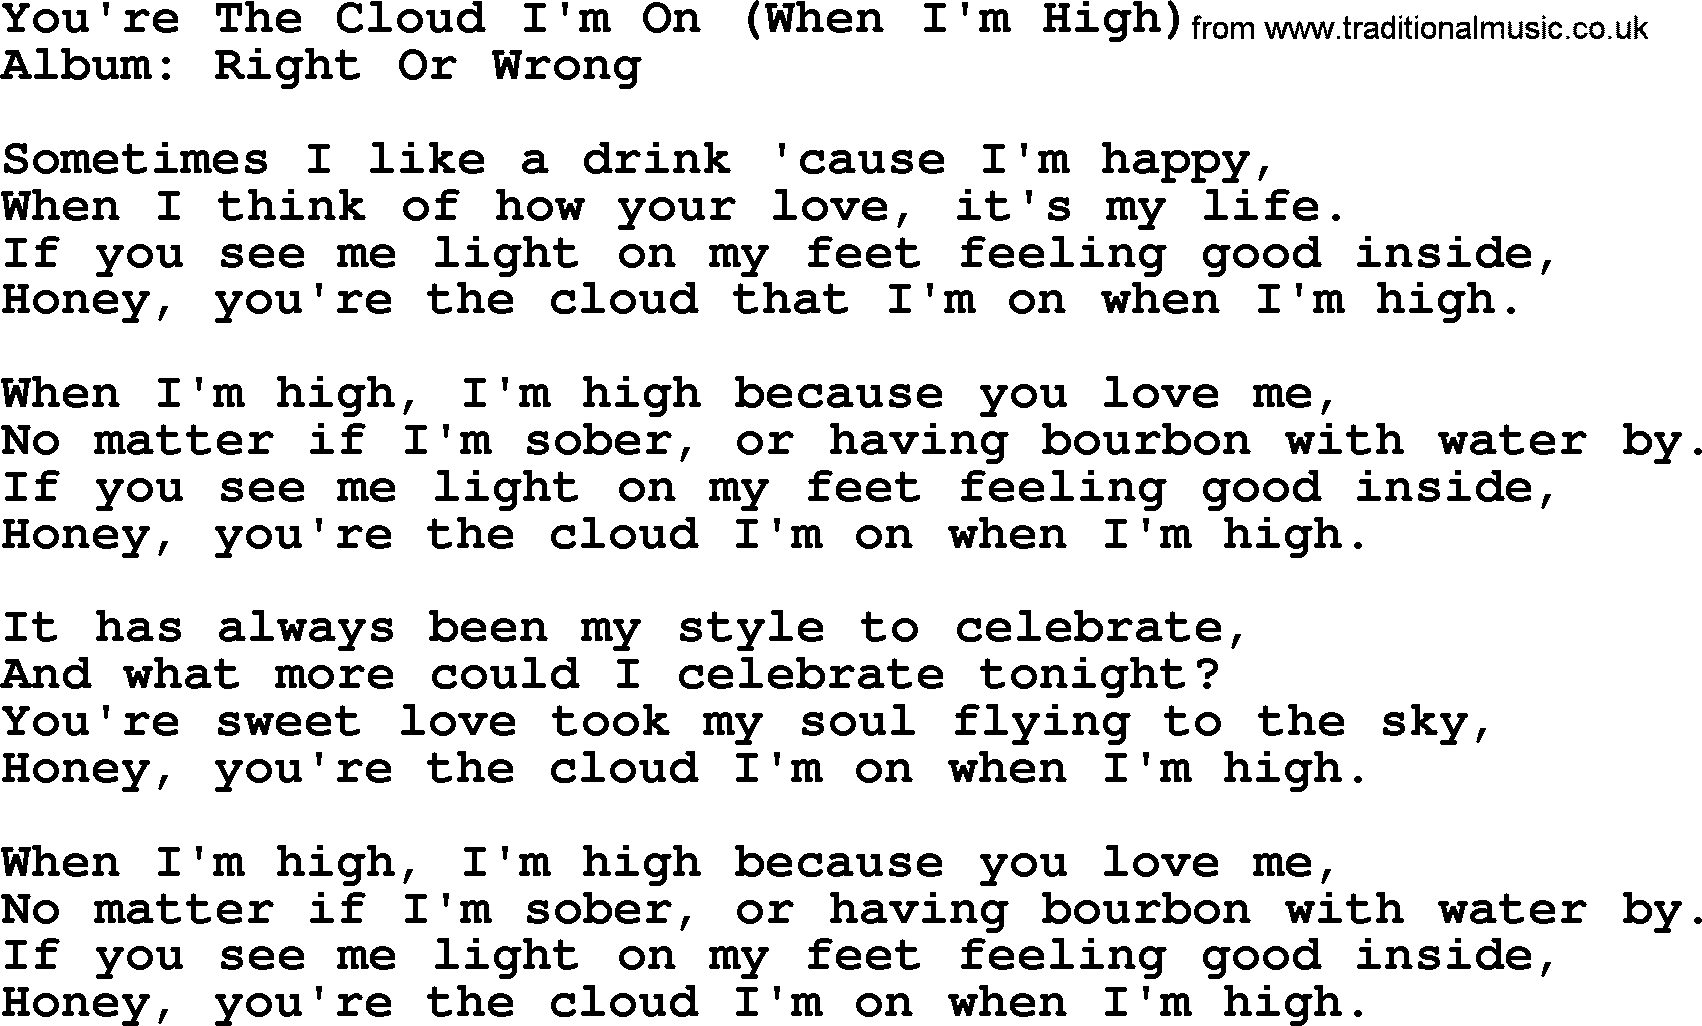 George Strait song: You're The Cloud I'm On (When I'm High), lyrics